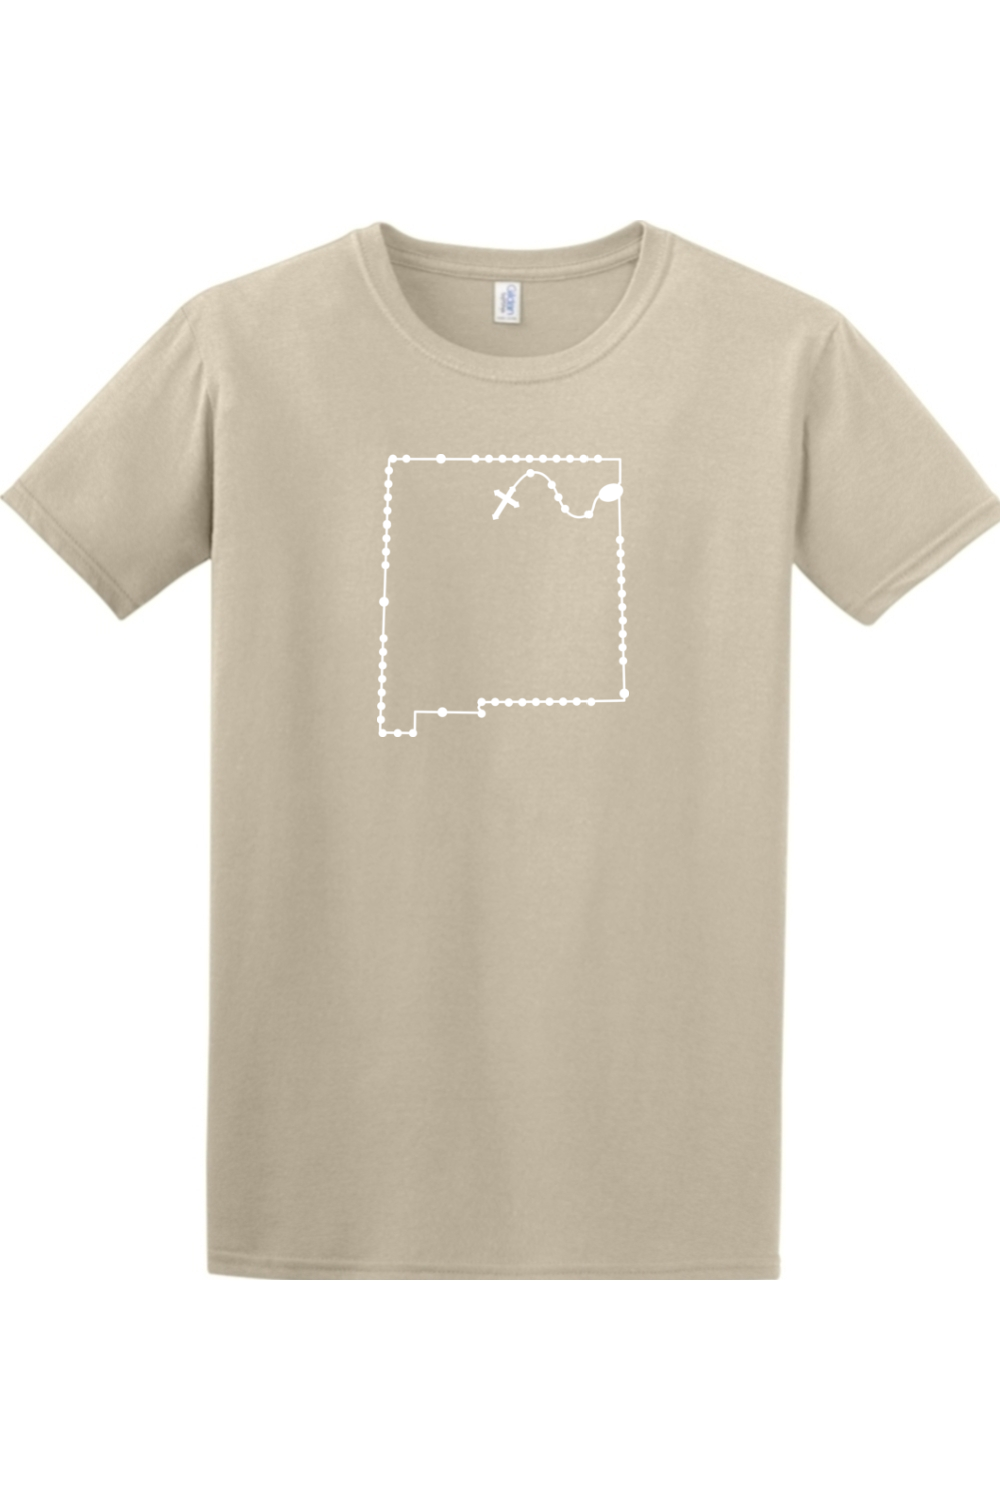 New Mexico Rosary Adult T-shirt